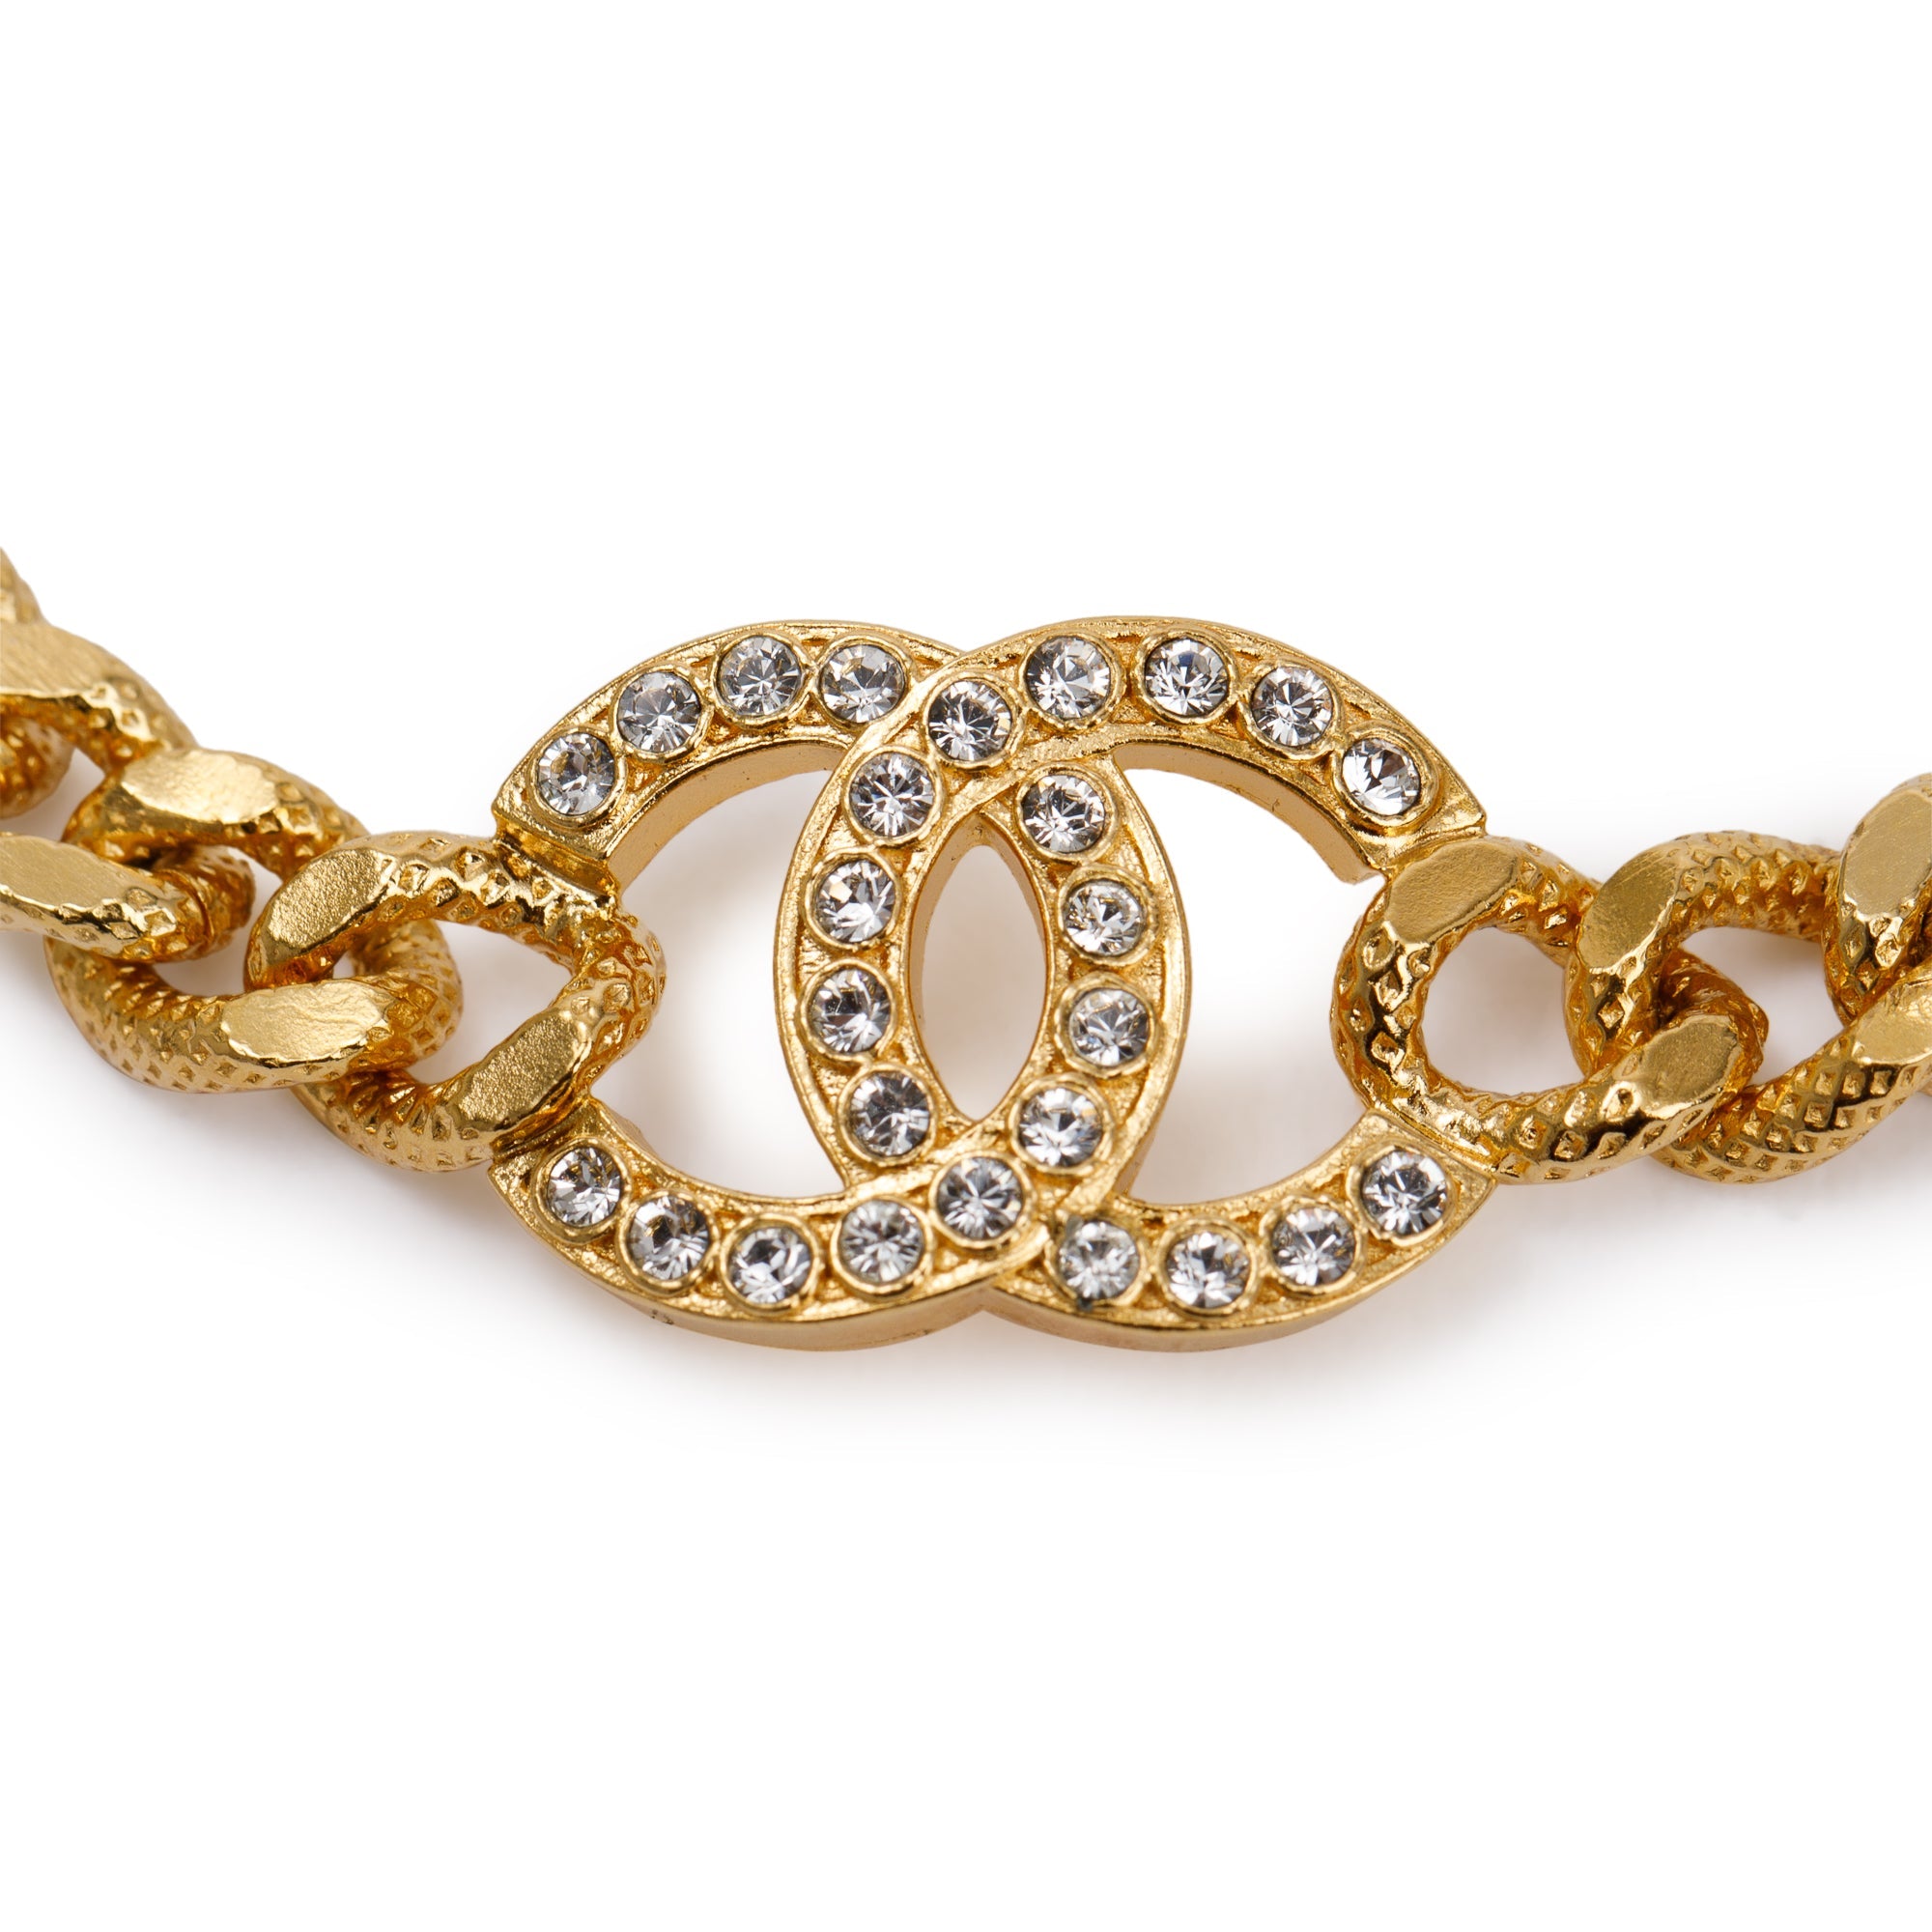 Chanel 2023 Strass CC Choker Necklace - Clear, Gold-Plated Choker